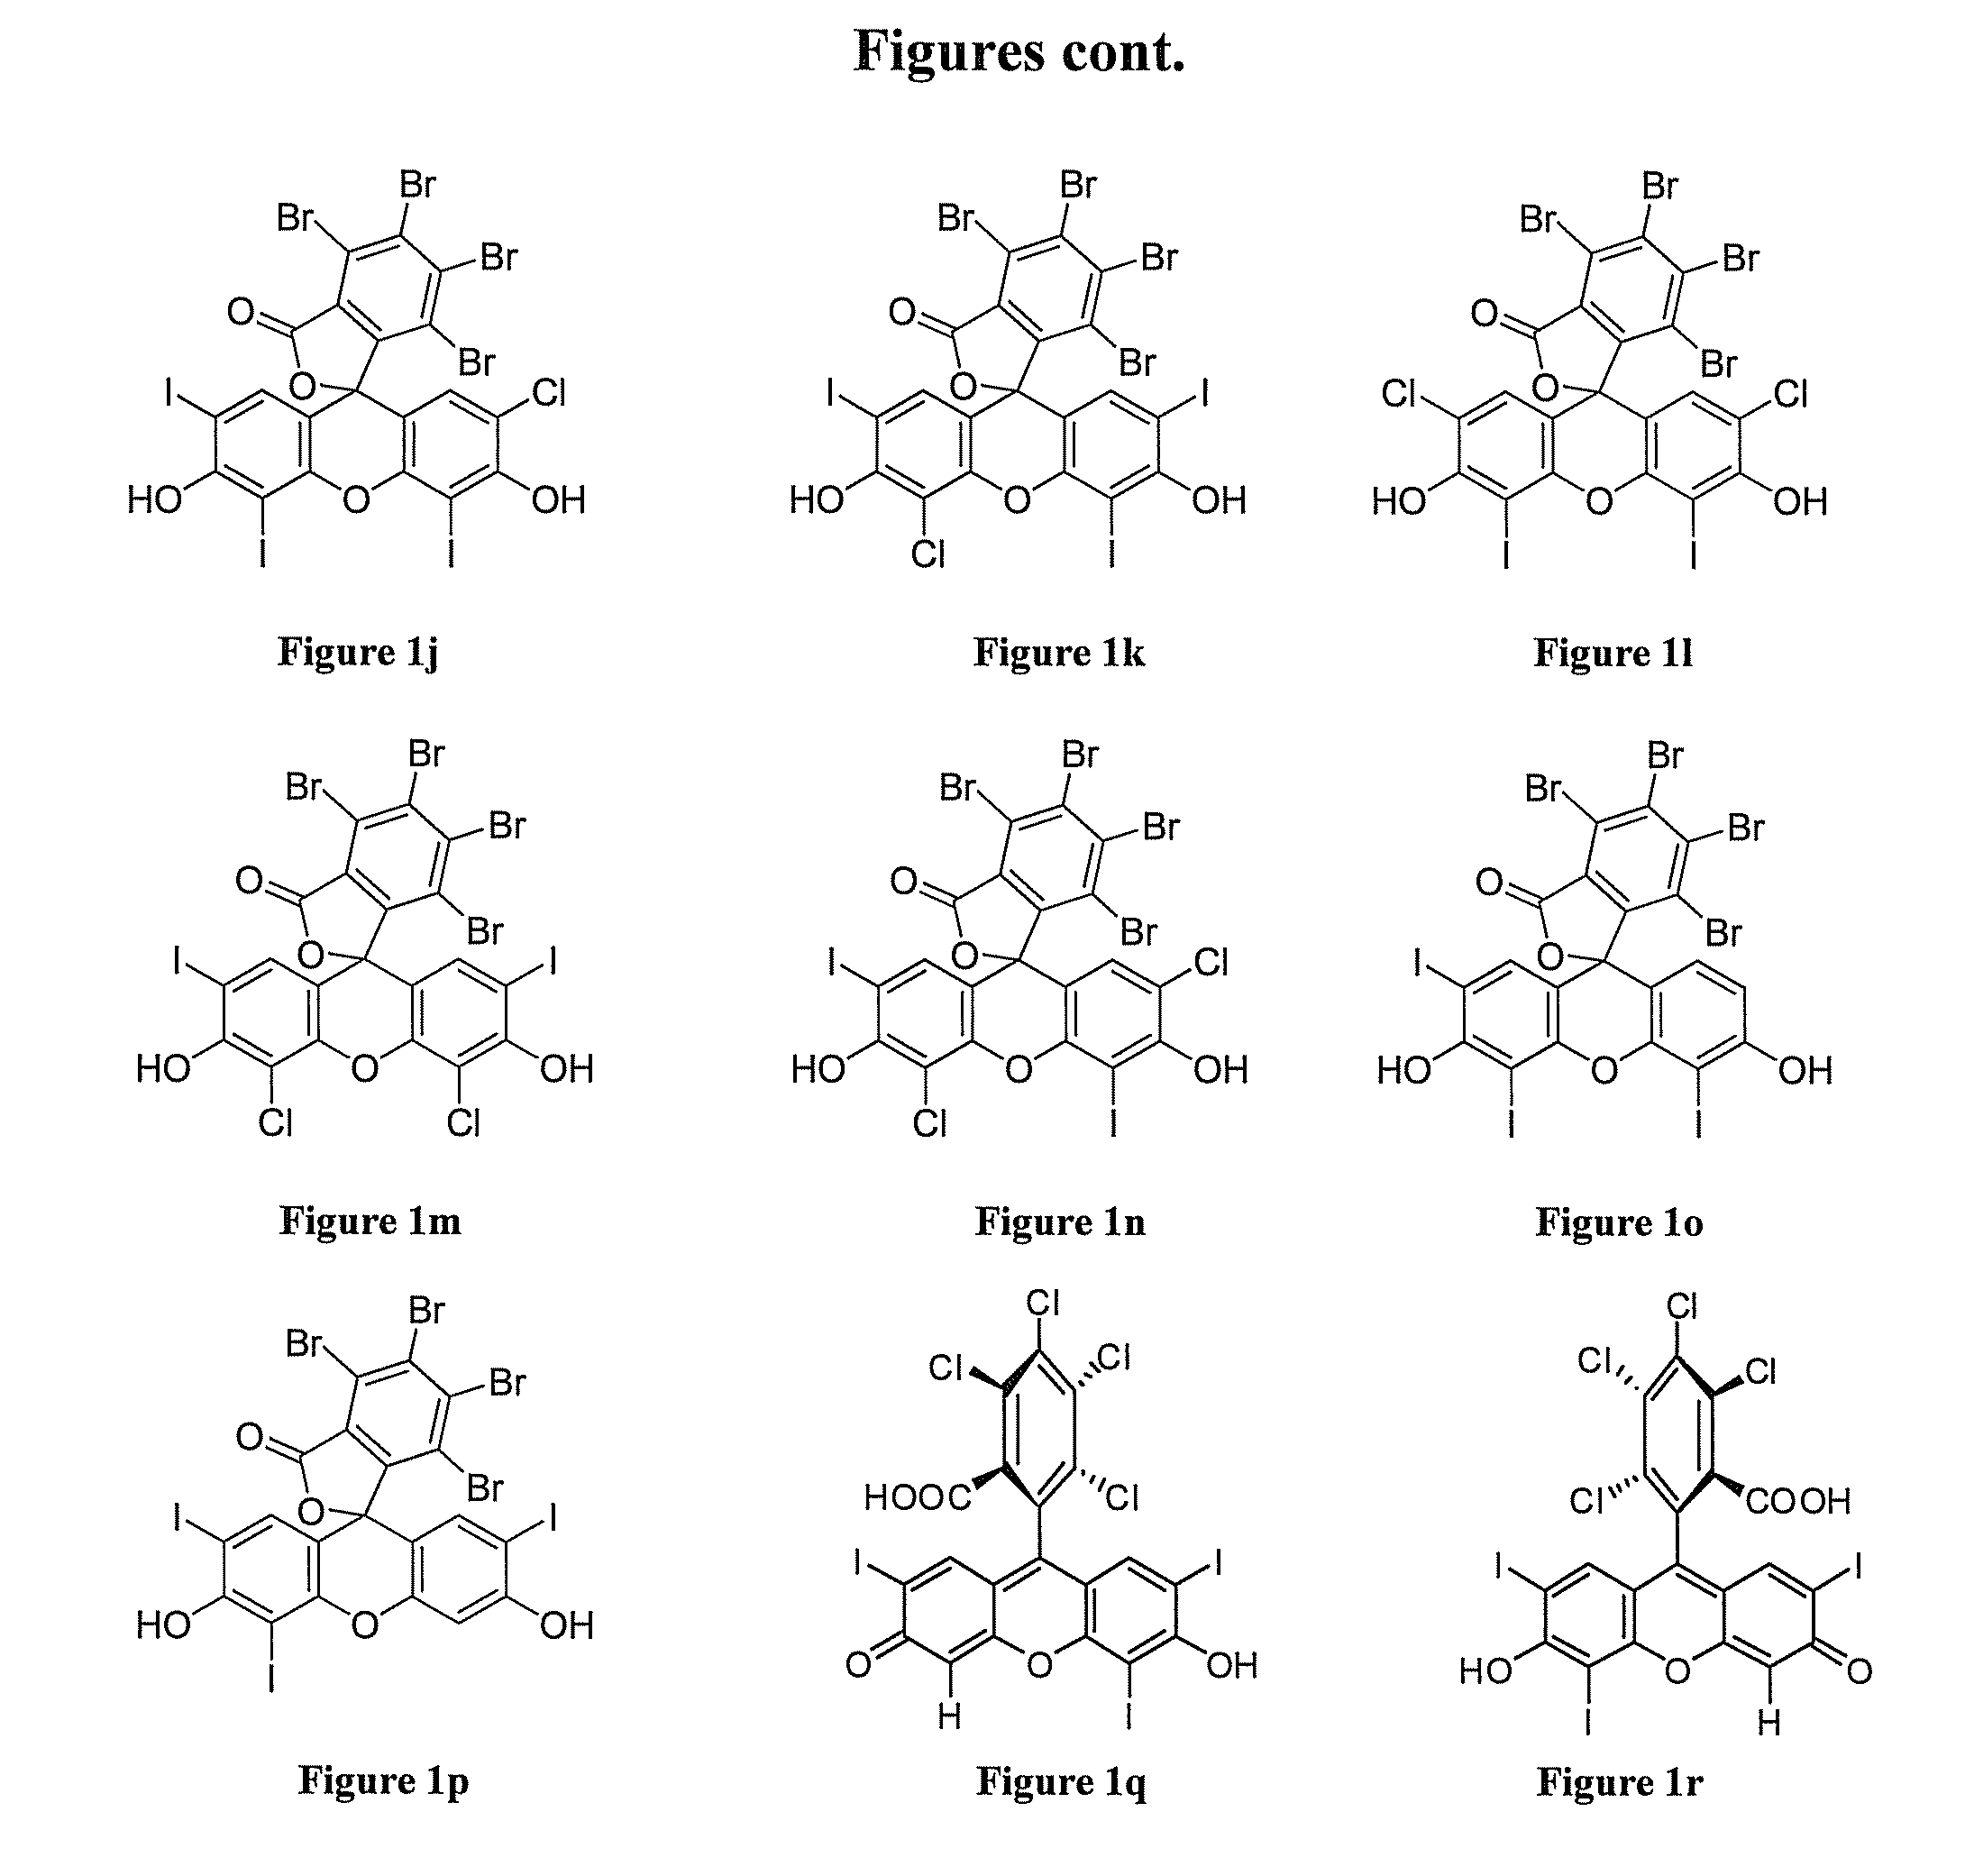 Process for the synthesis of 4,5,6,7-tetrachloro-3',6'-dihydroxy-2',4',5',7'-tetraiodo-3H-spiro[isobenzofuran-1,9'-xanthen]-3-one (rose bengal) and related xanthenes